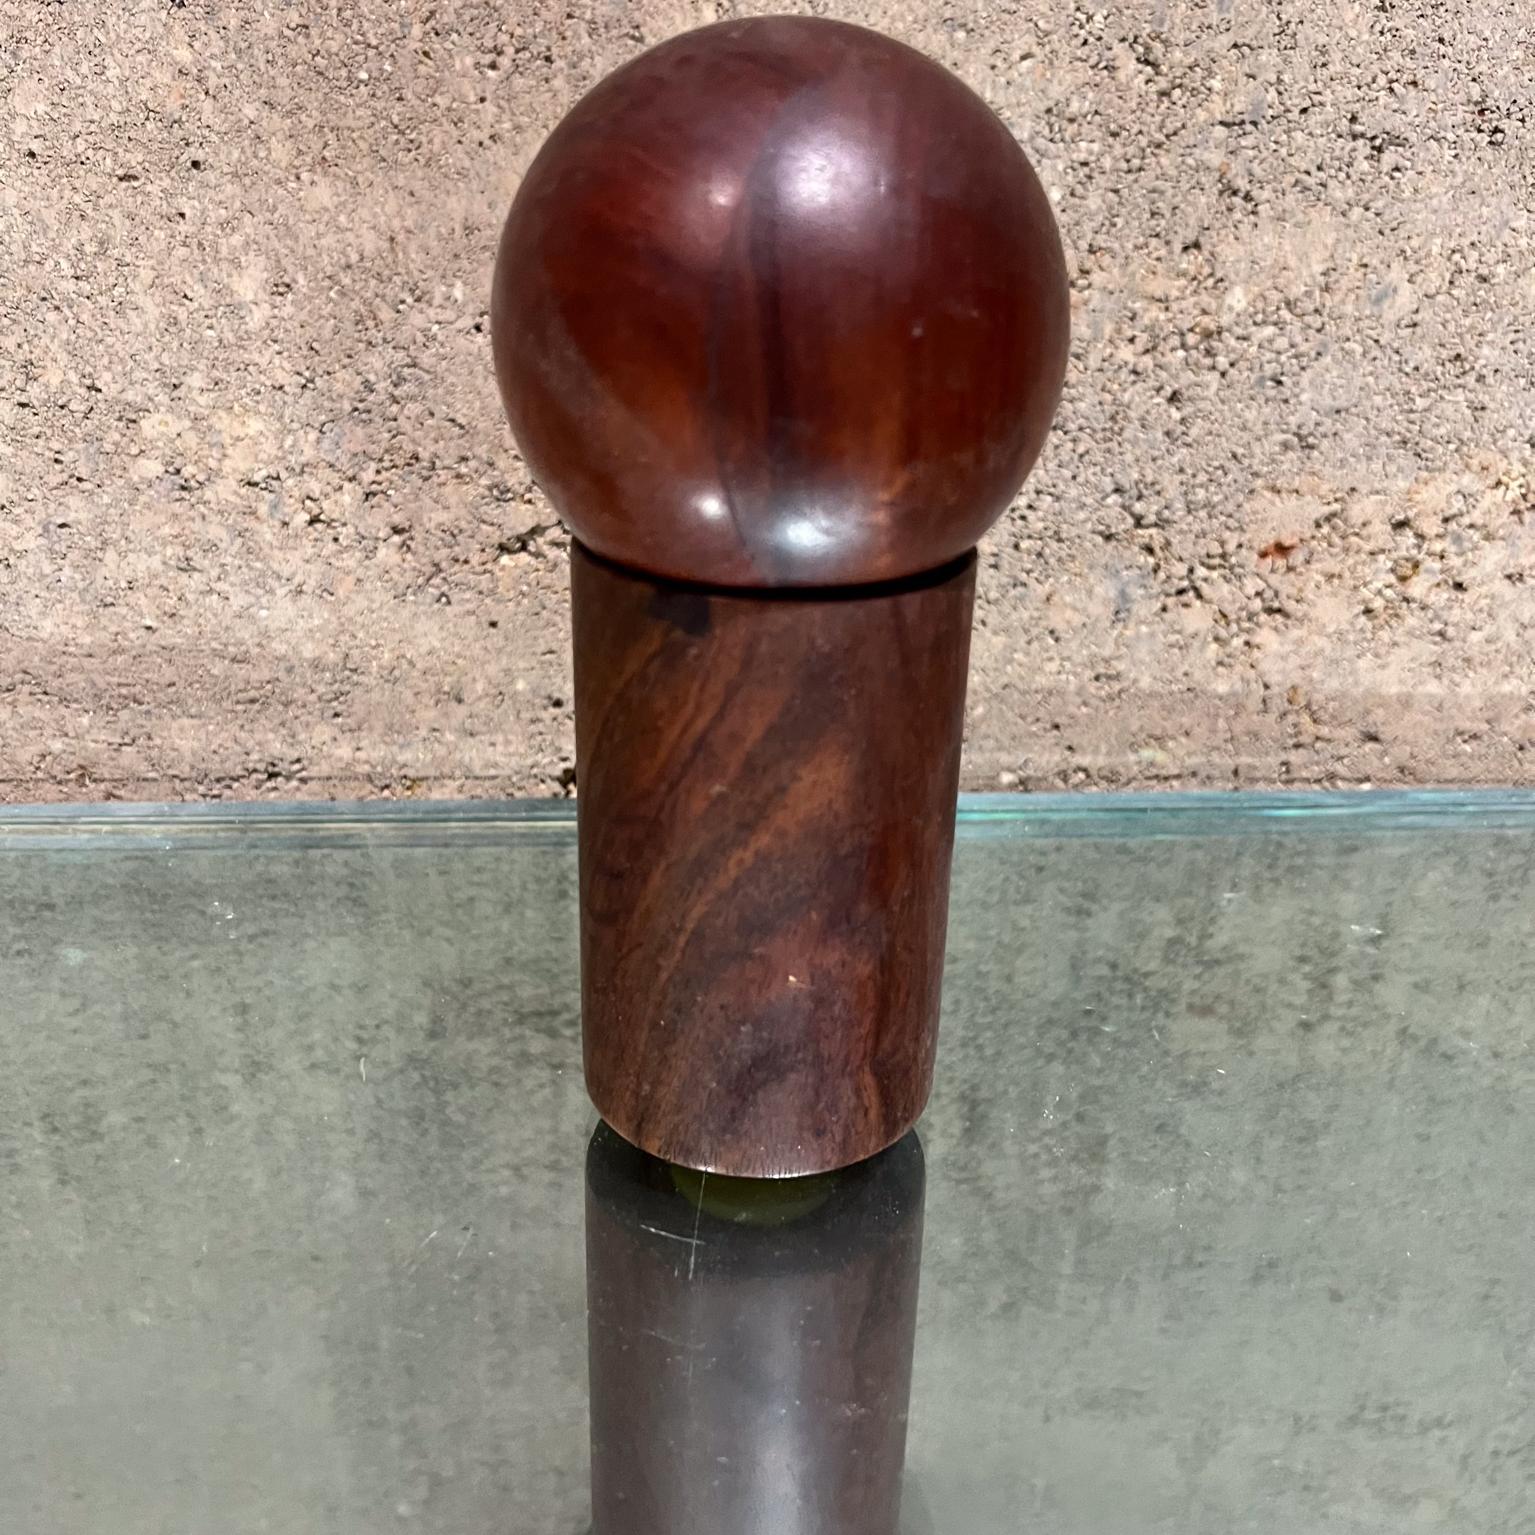 
1960s Modern Nesting Salt & Pepper Shaker Rosewood Ball + Cylinder
 6.25 H x 3 inches Diameter Ball 3 x 3 Cylinder 3.5 H x 2.25 inches diameter
Original caps in yellow. stamped CAP LUGS, EP-16, MAS 820-16-165
Small nicks present. Hard to see, but